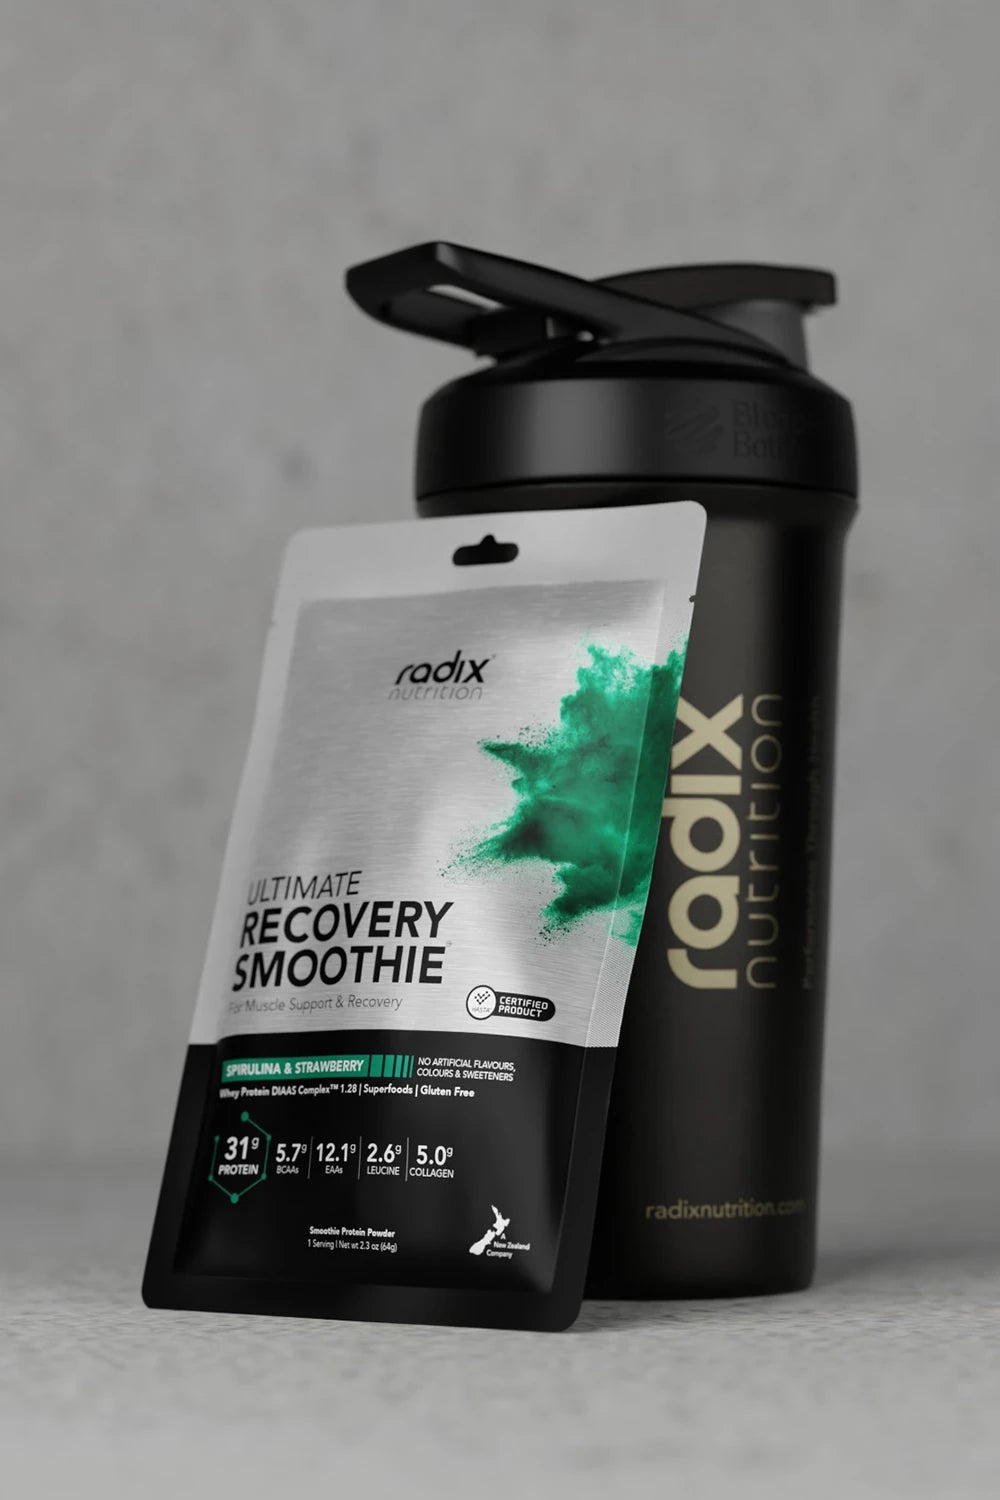 Radix Ultimate Recovery Smoothie Spirulina & Strawberry - Whey Protein | Coffee Outdoors